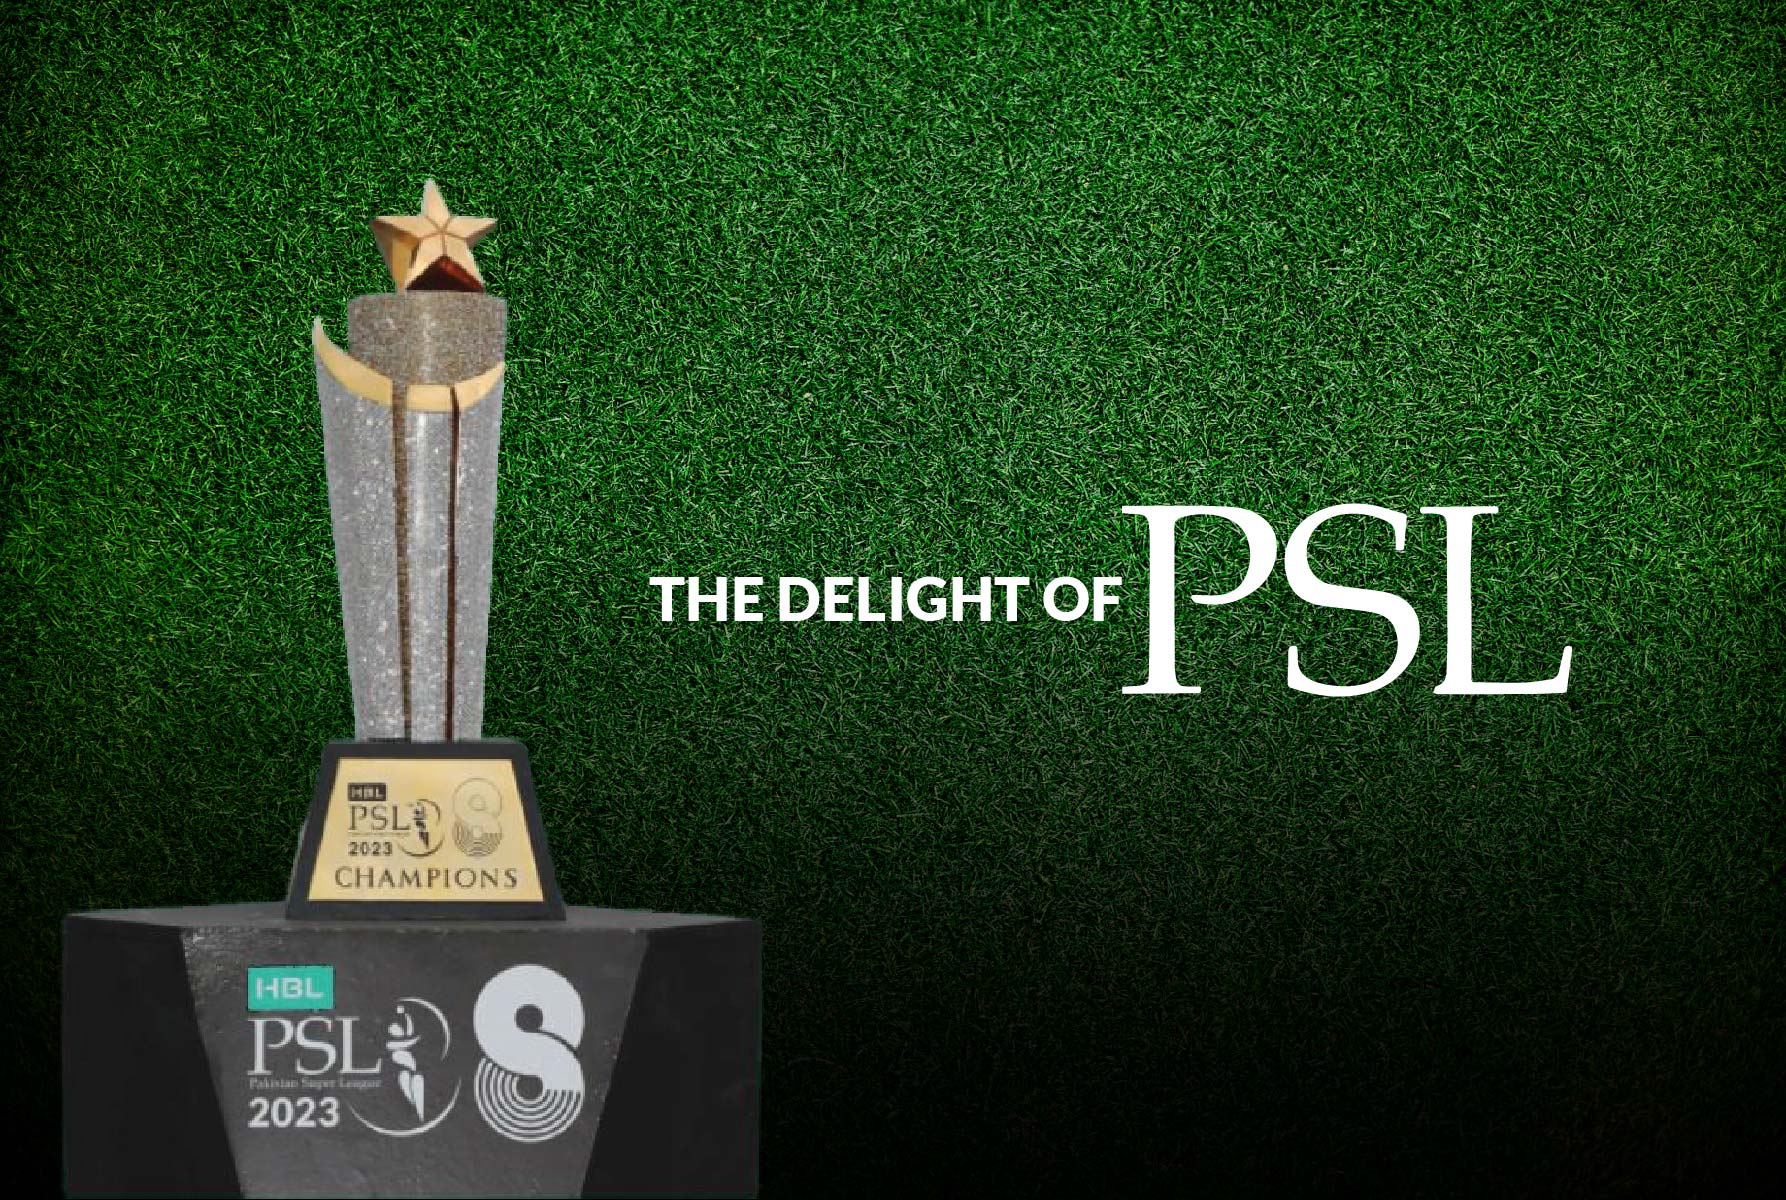 The Delight of PSL